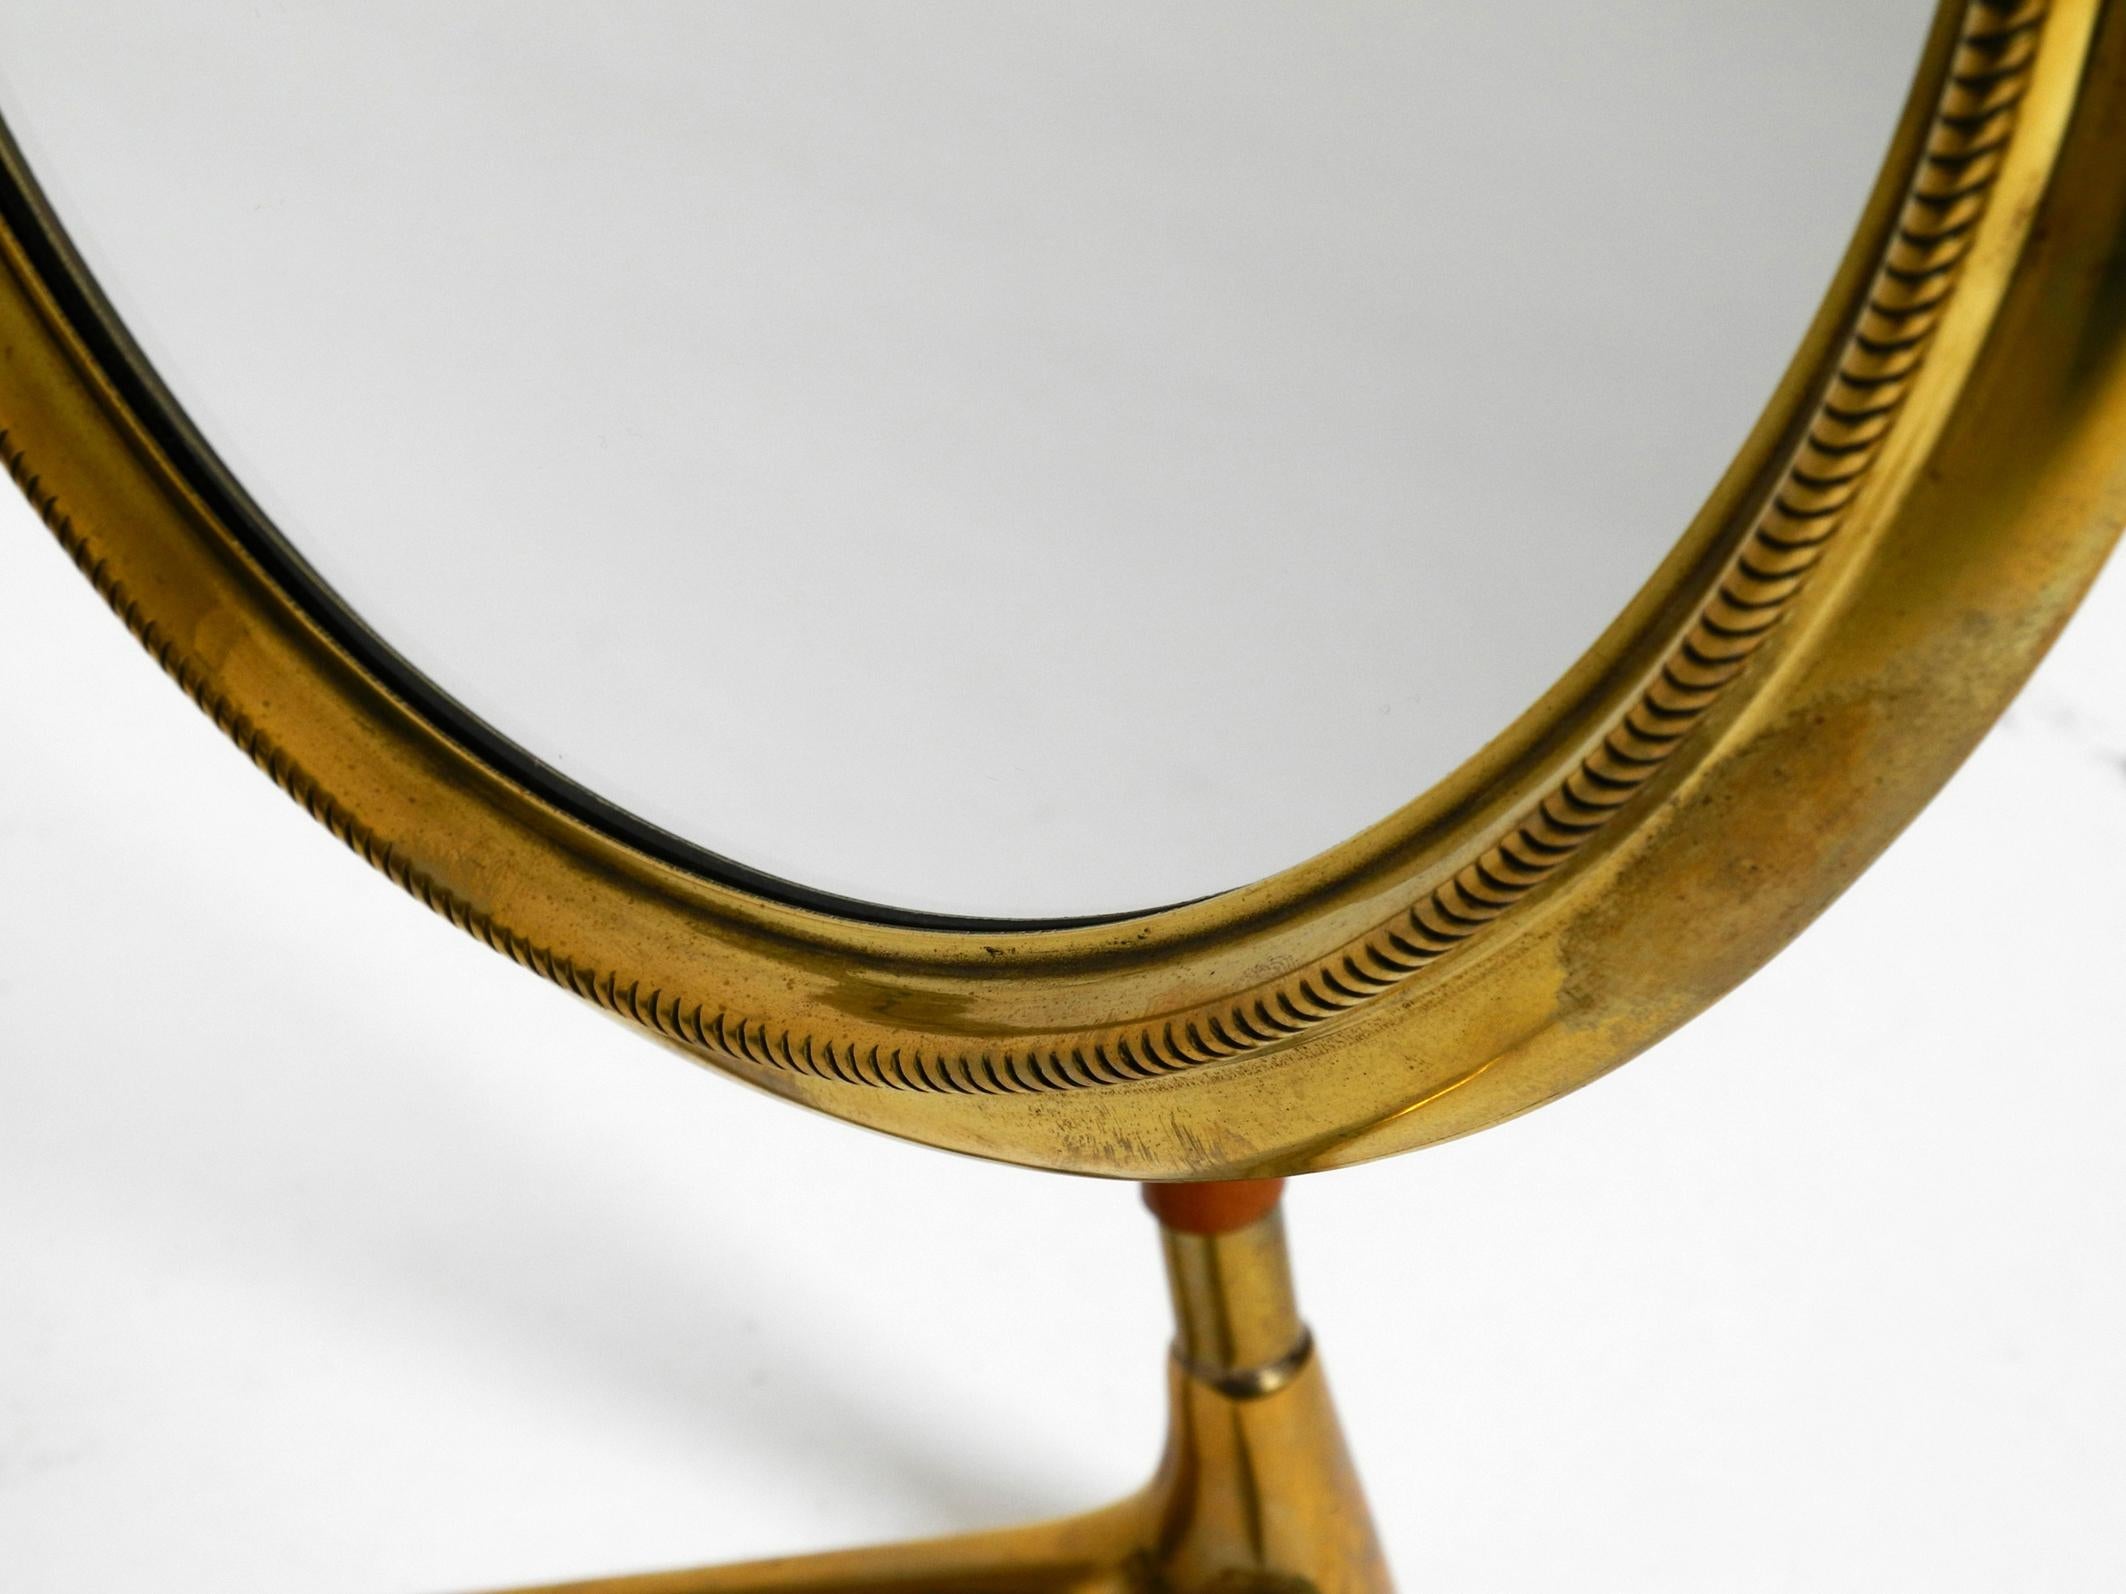 Large Italian Midcentury Crow's Foot Table Mirror Made of Brass and Leather 11